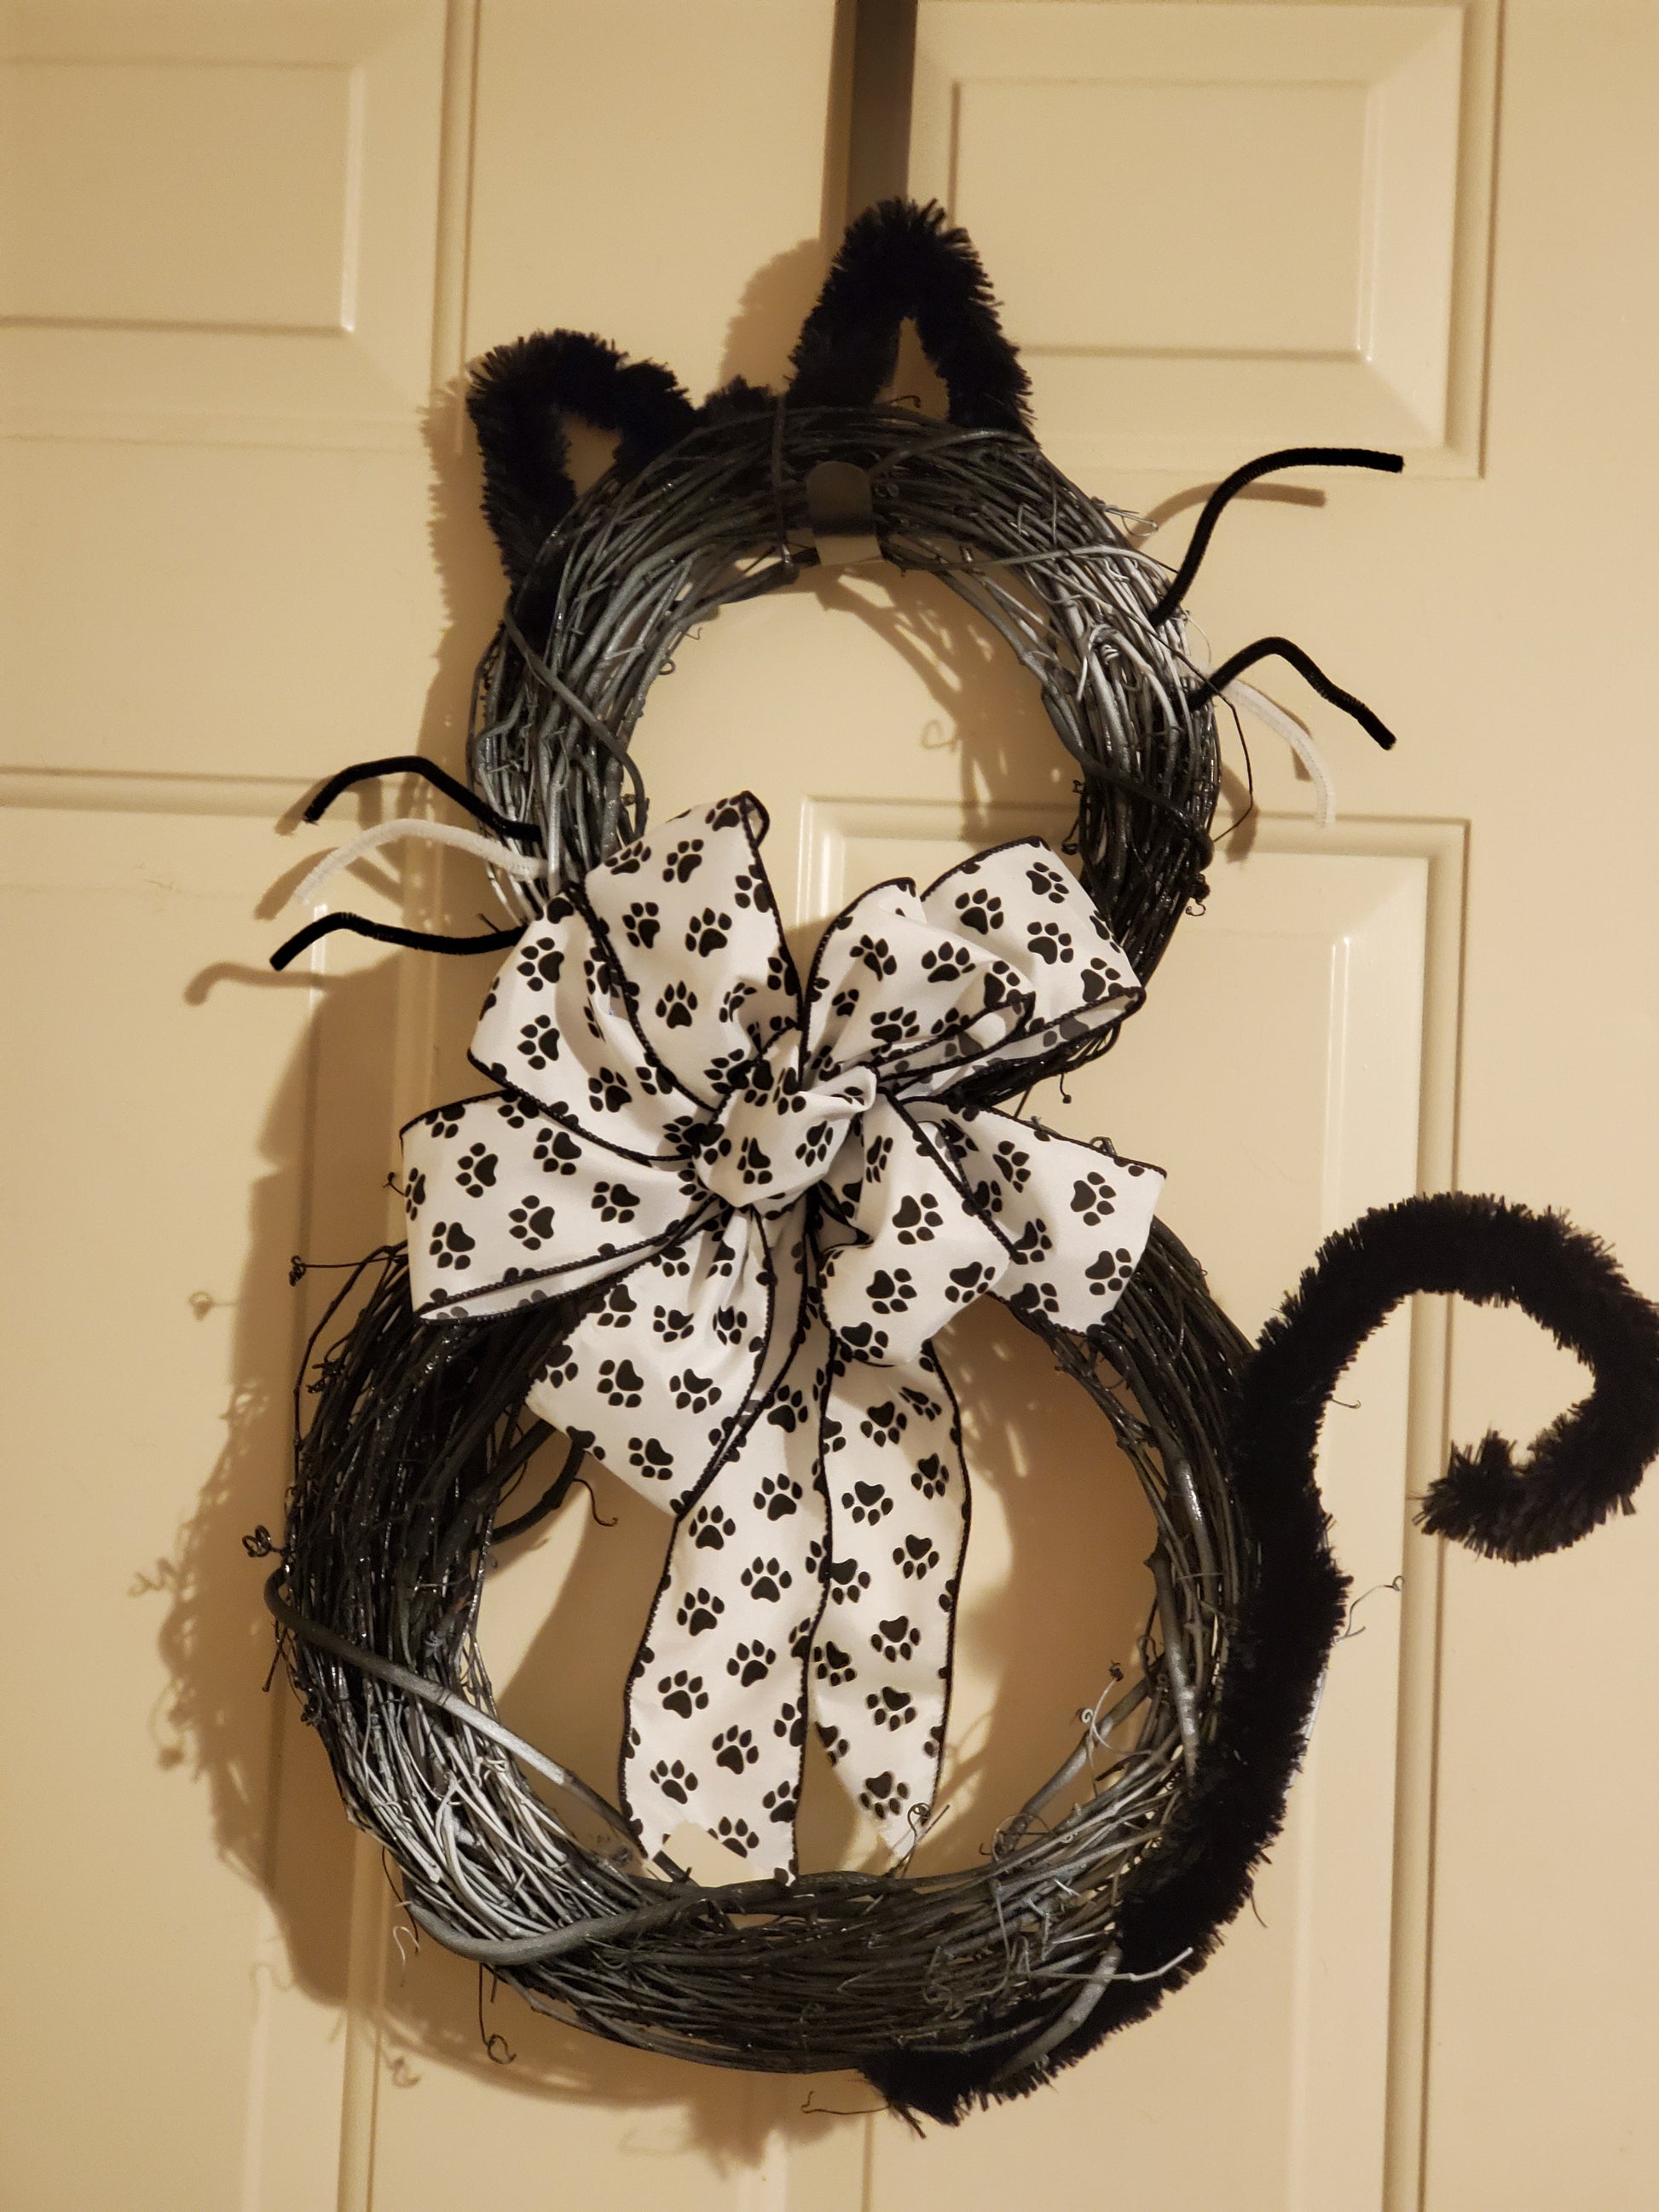 Hillbilly House Panthers Handmade Large Cat Wreath - Hillbilly House Panthers